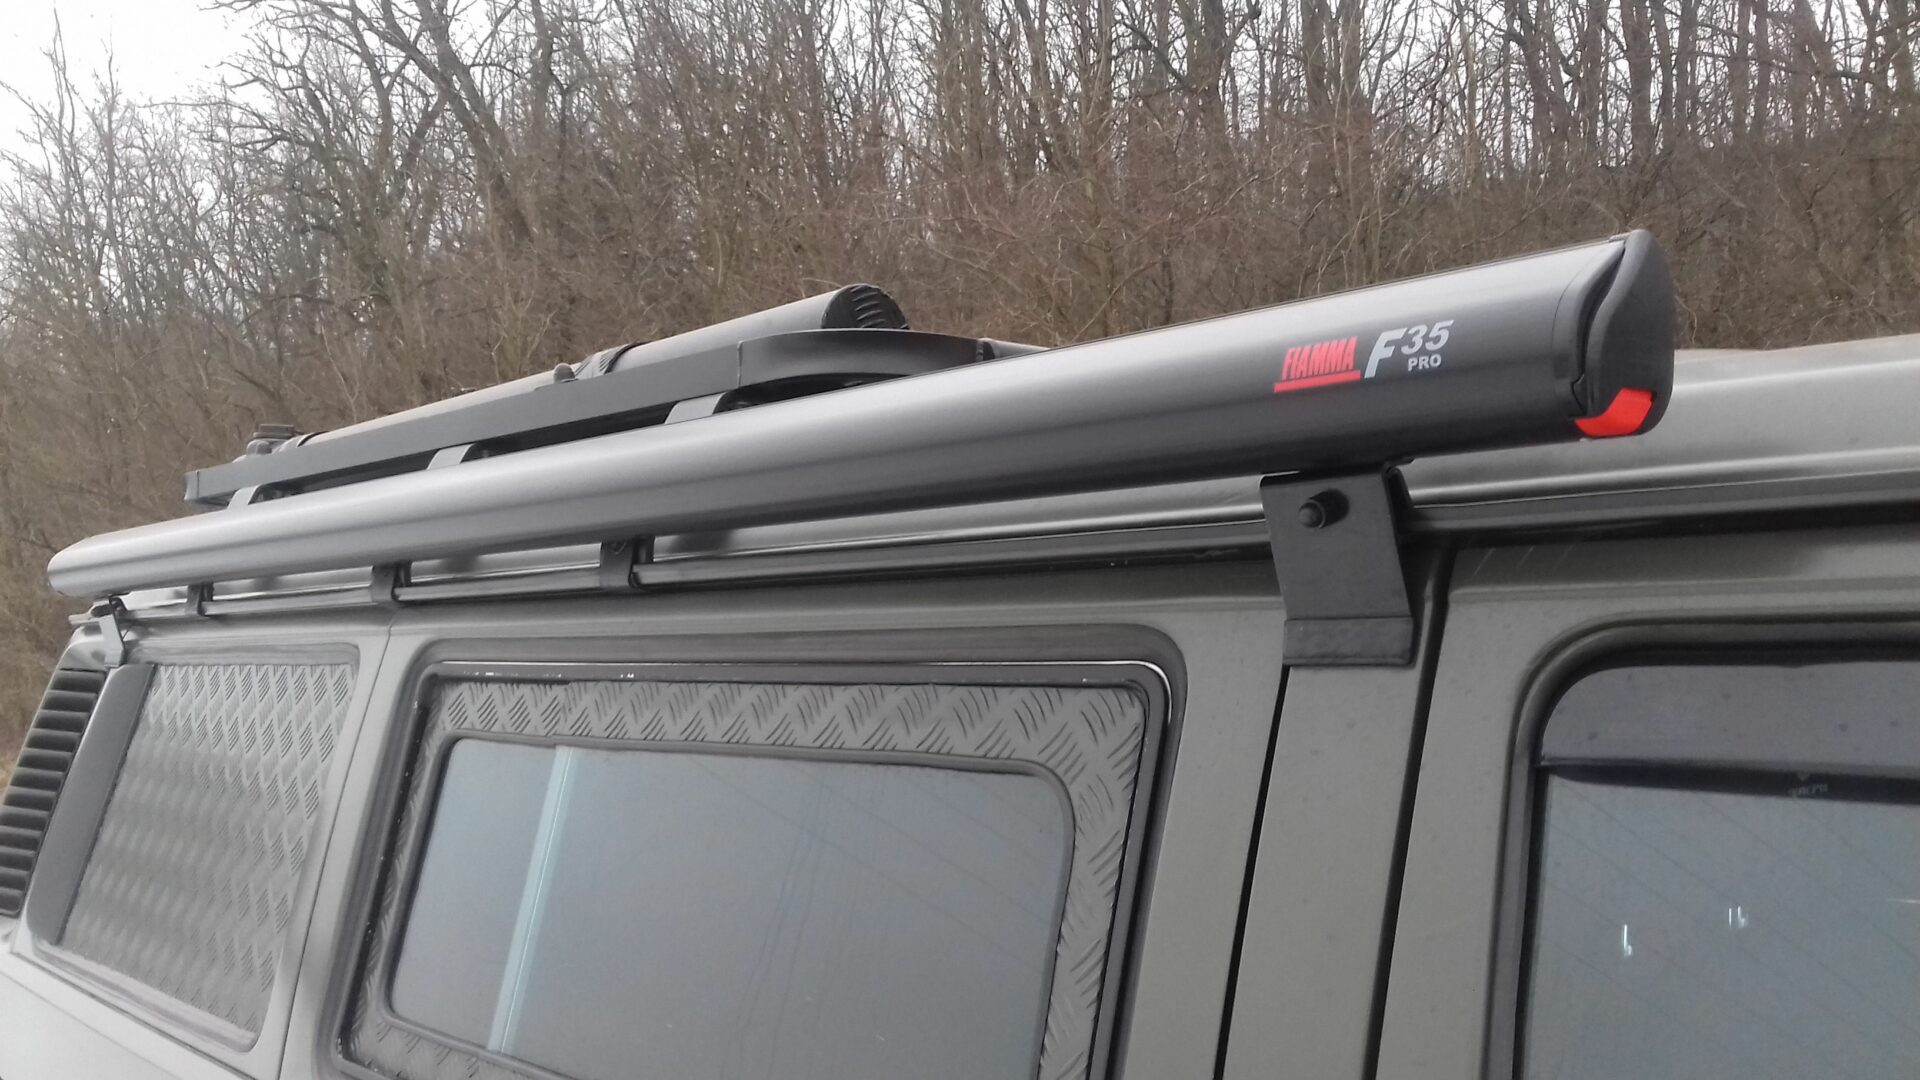 Fiamma F35 Pro Wall Mount Awning for Overlanding Vehicles and SUV's